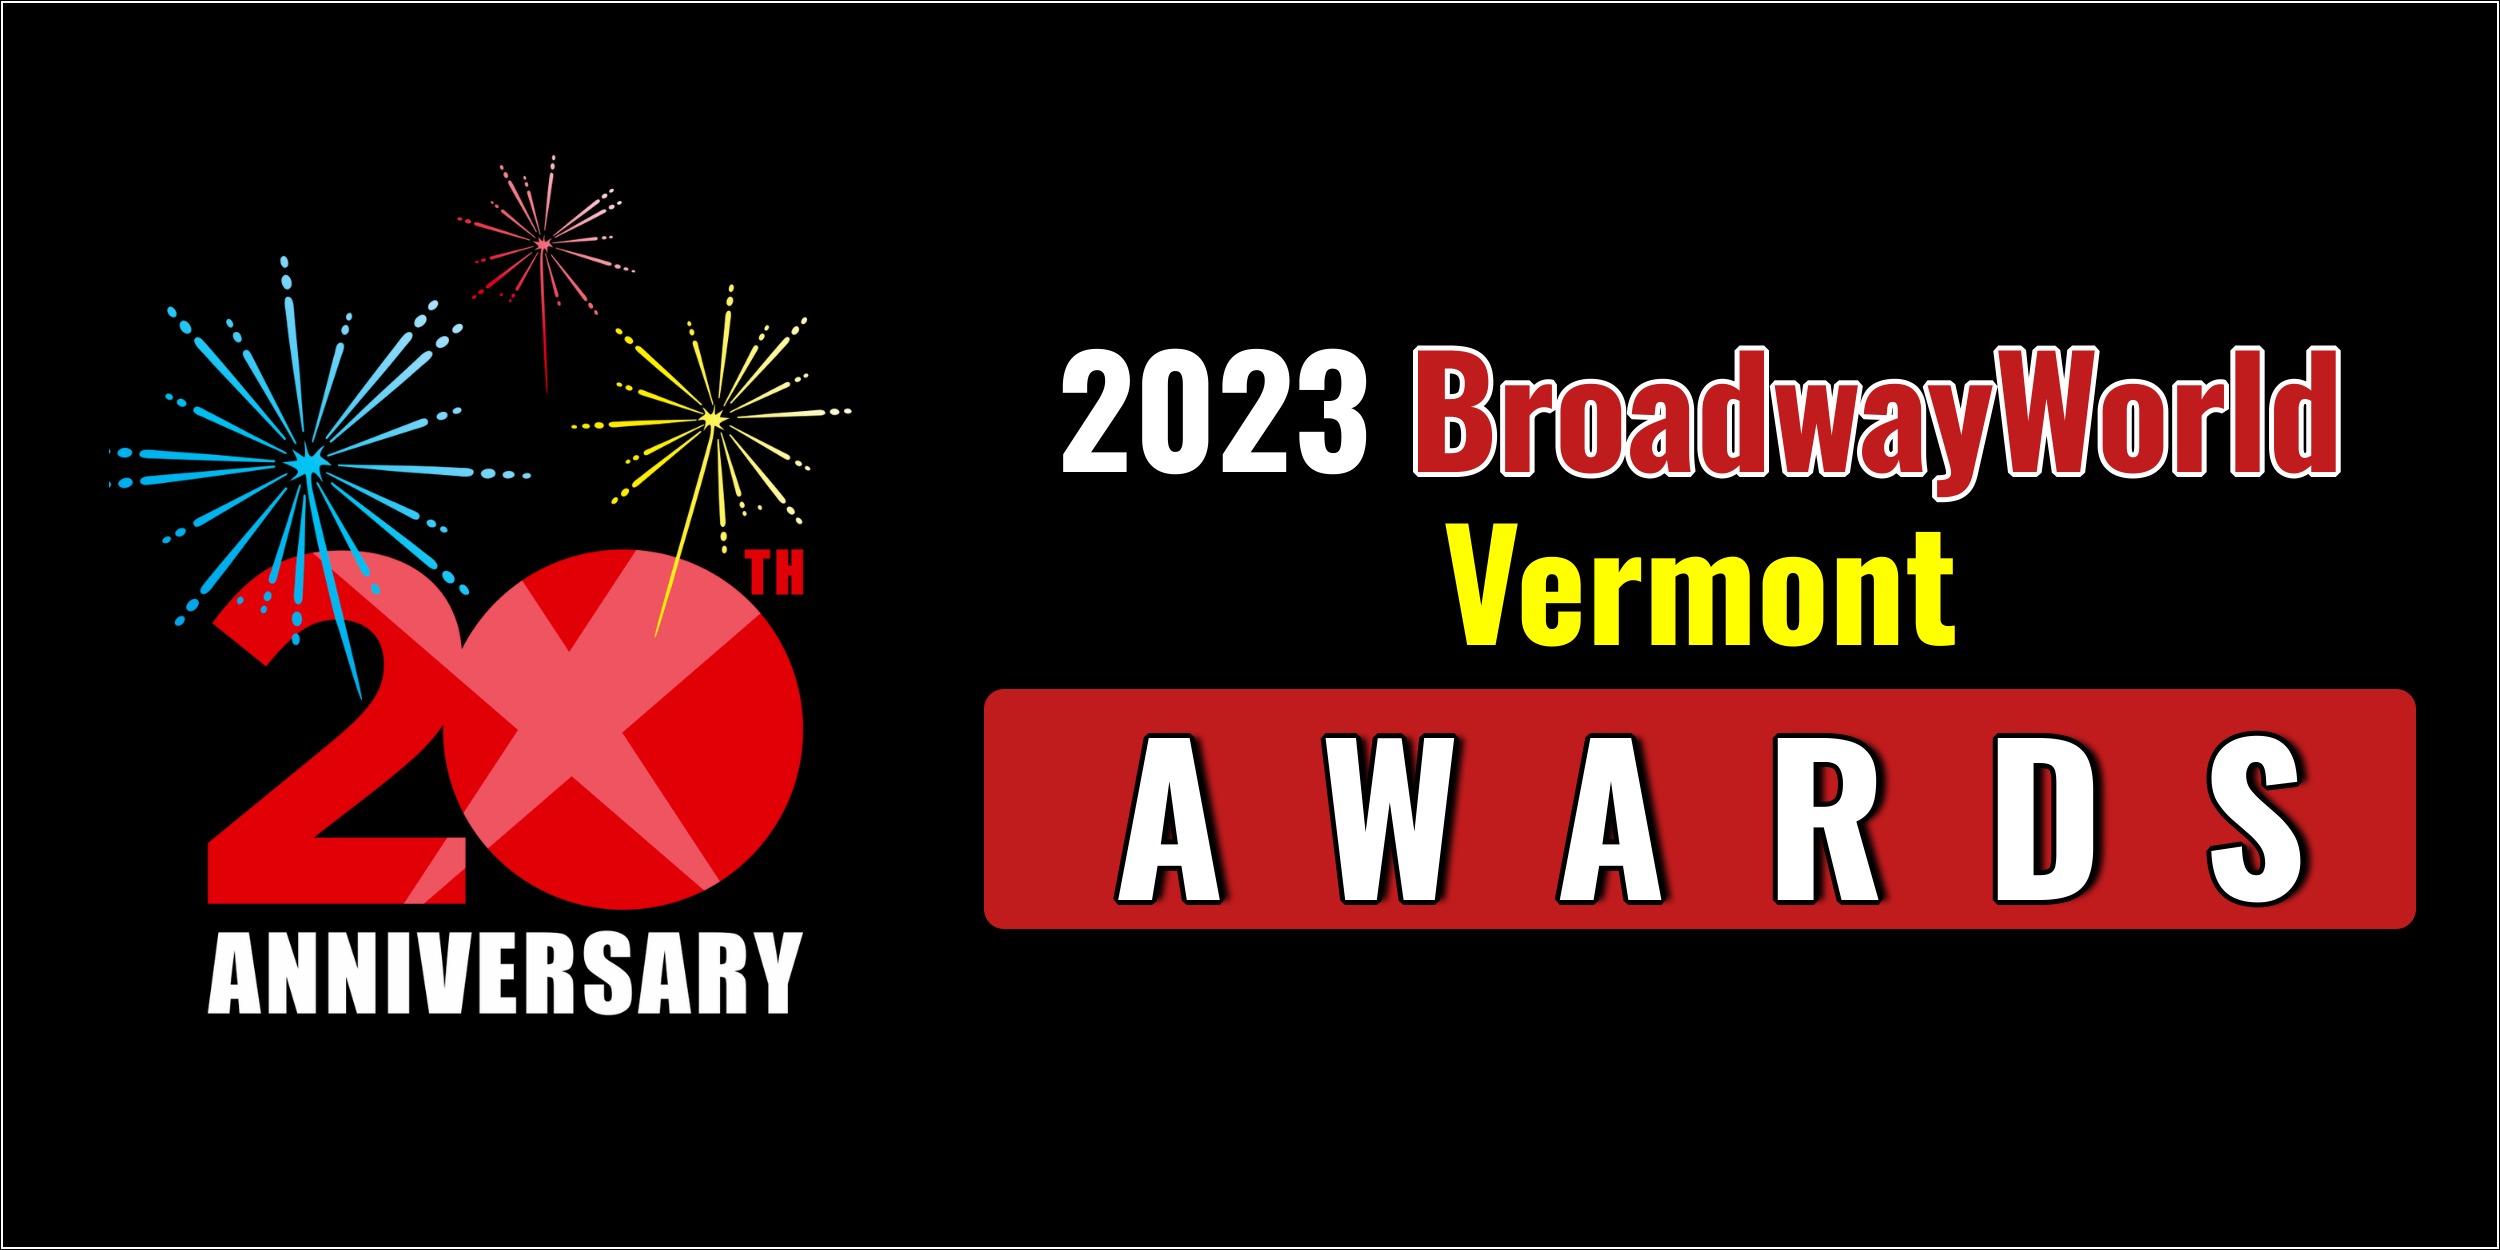 Latest Standings Announced For The 2023 BroadwayWorld Vermont Awards; INTO THE WOODS Leads Photo